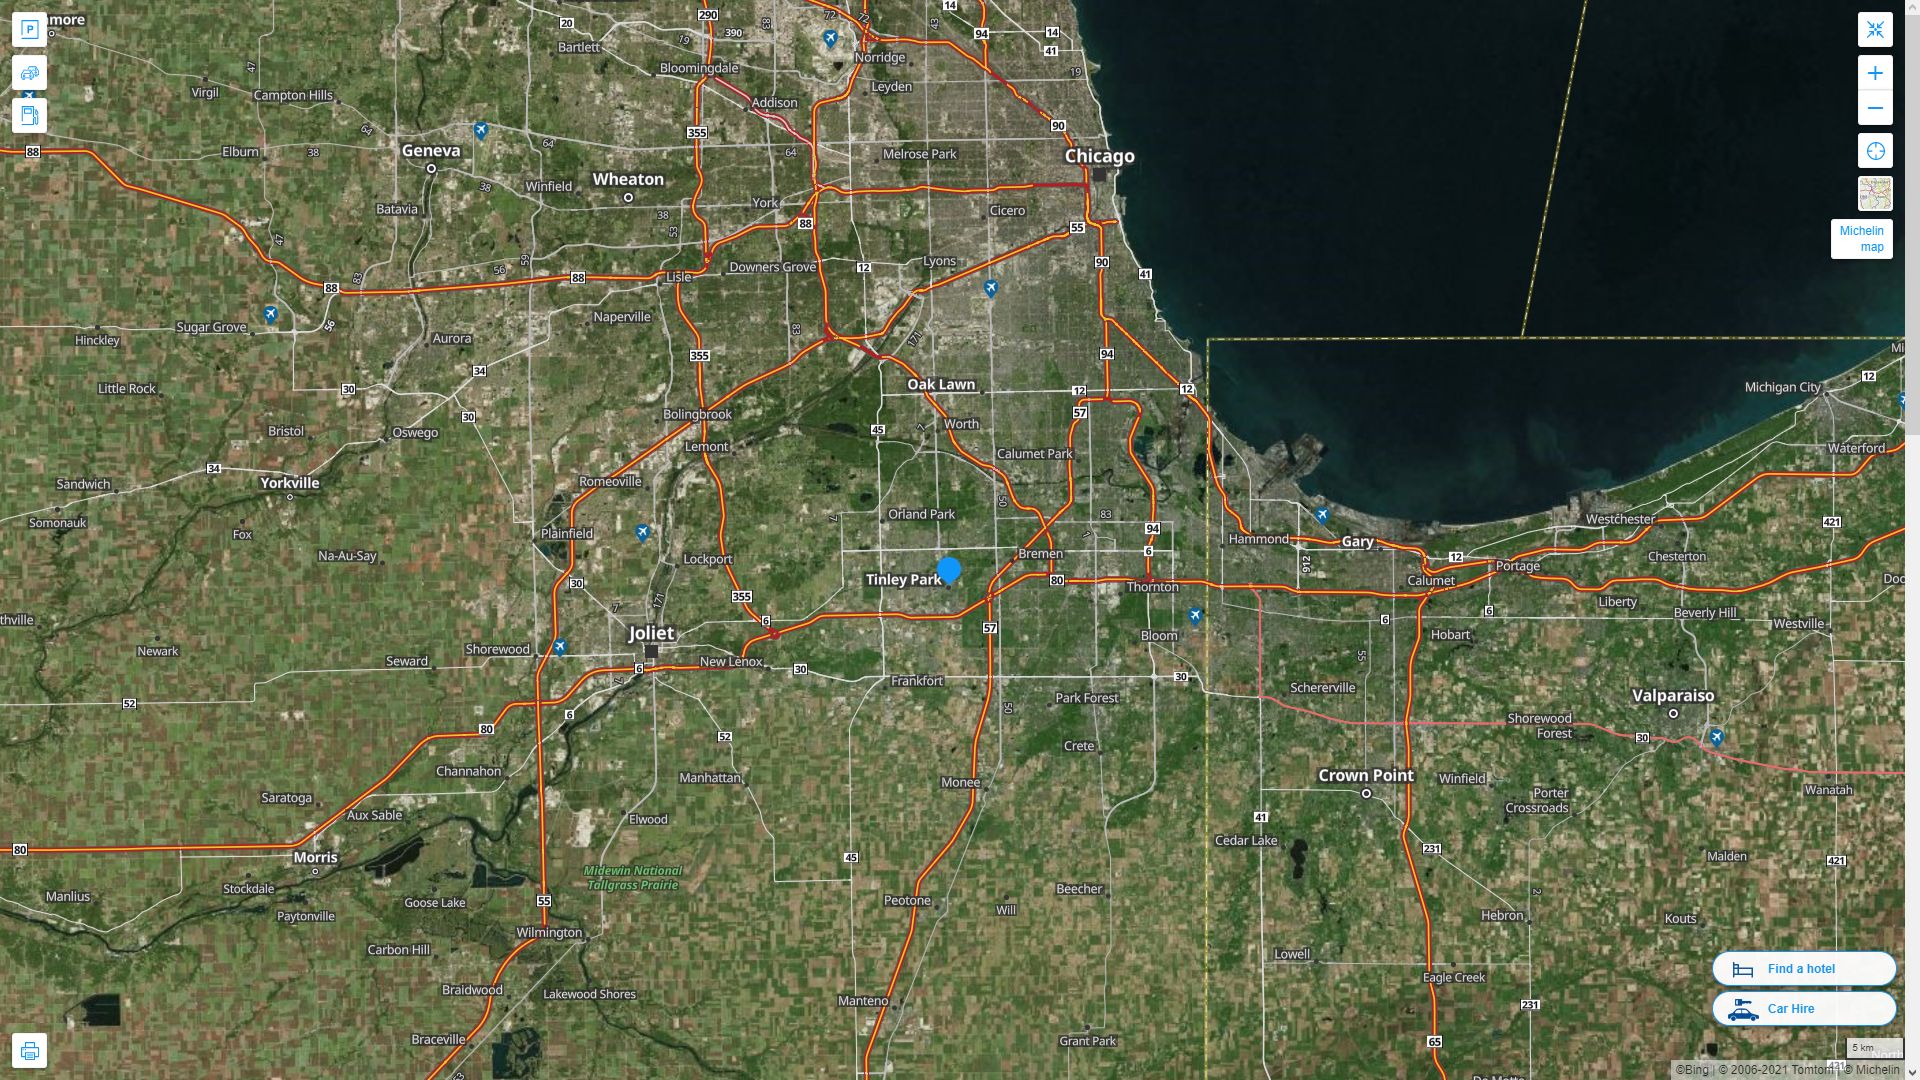 Tinley Park illinois Highway and Road Map with Satellite View